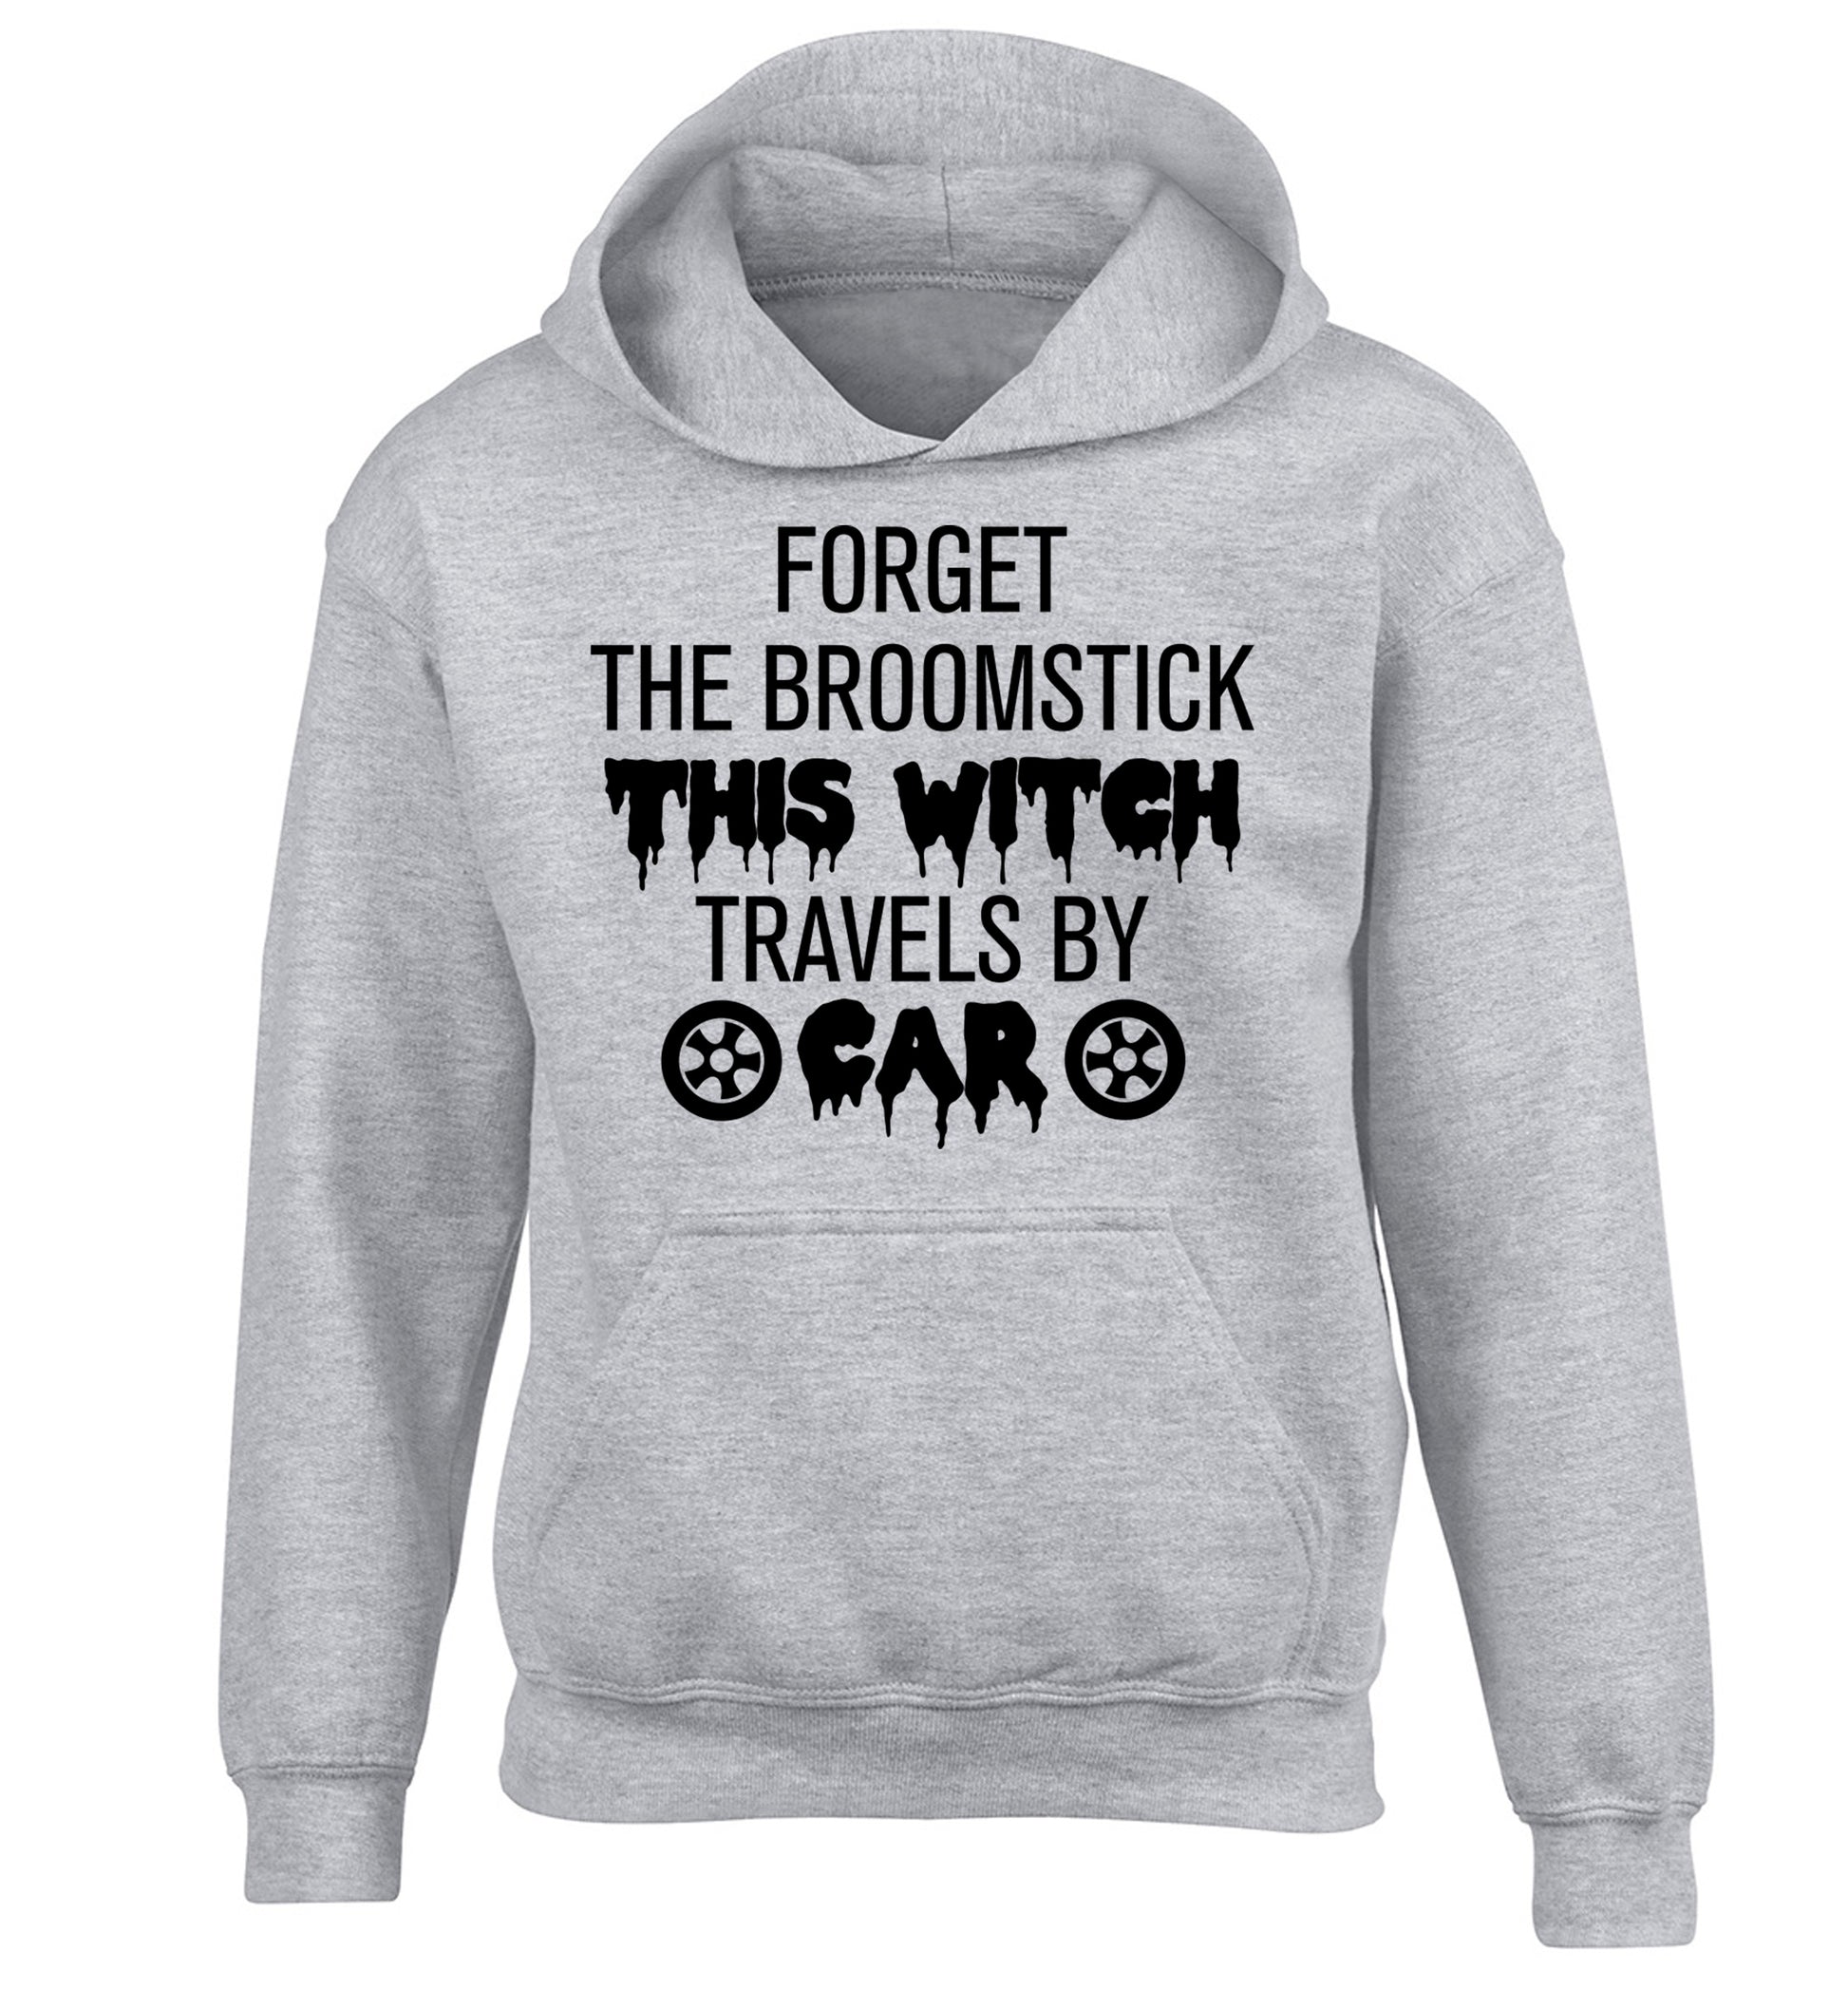 Forget the broomstick this witch travels by car children's grey hoodie 12-14 Years